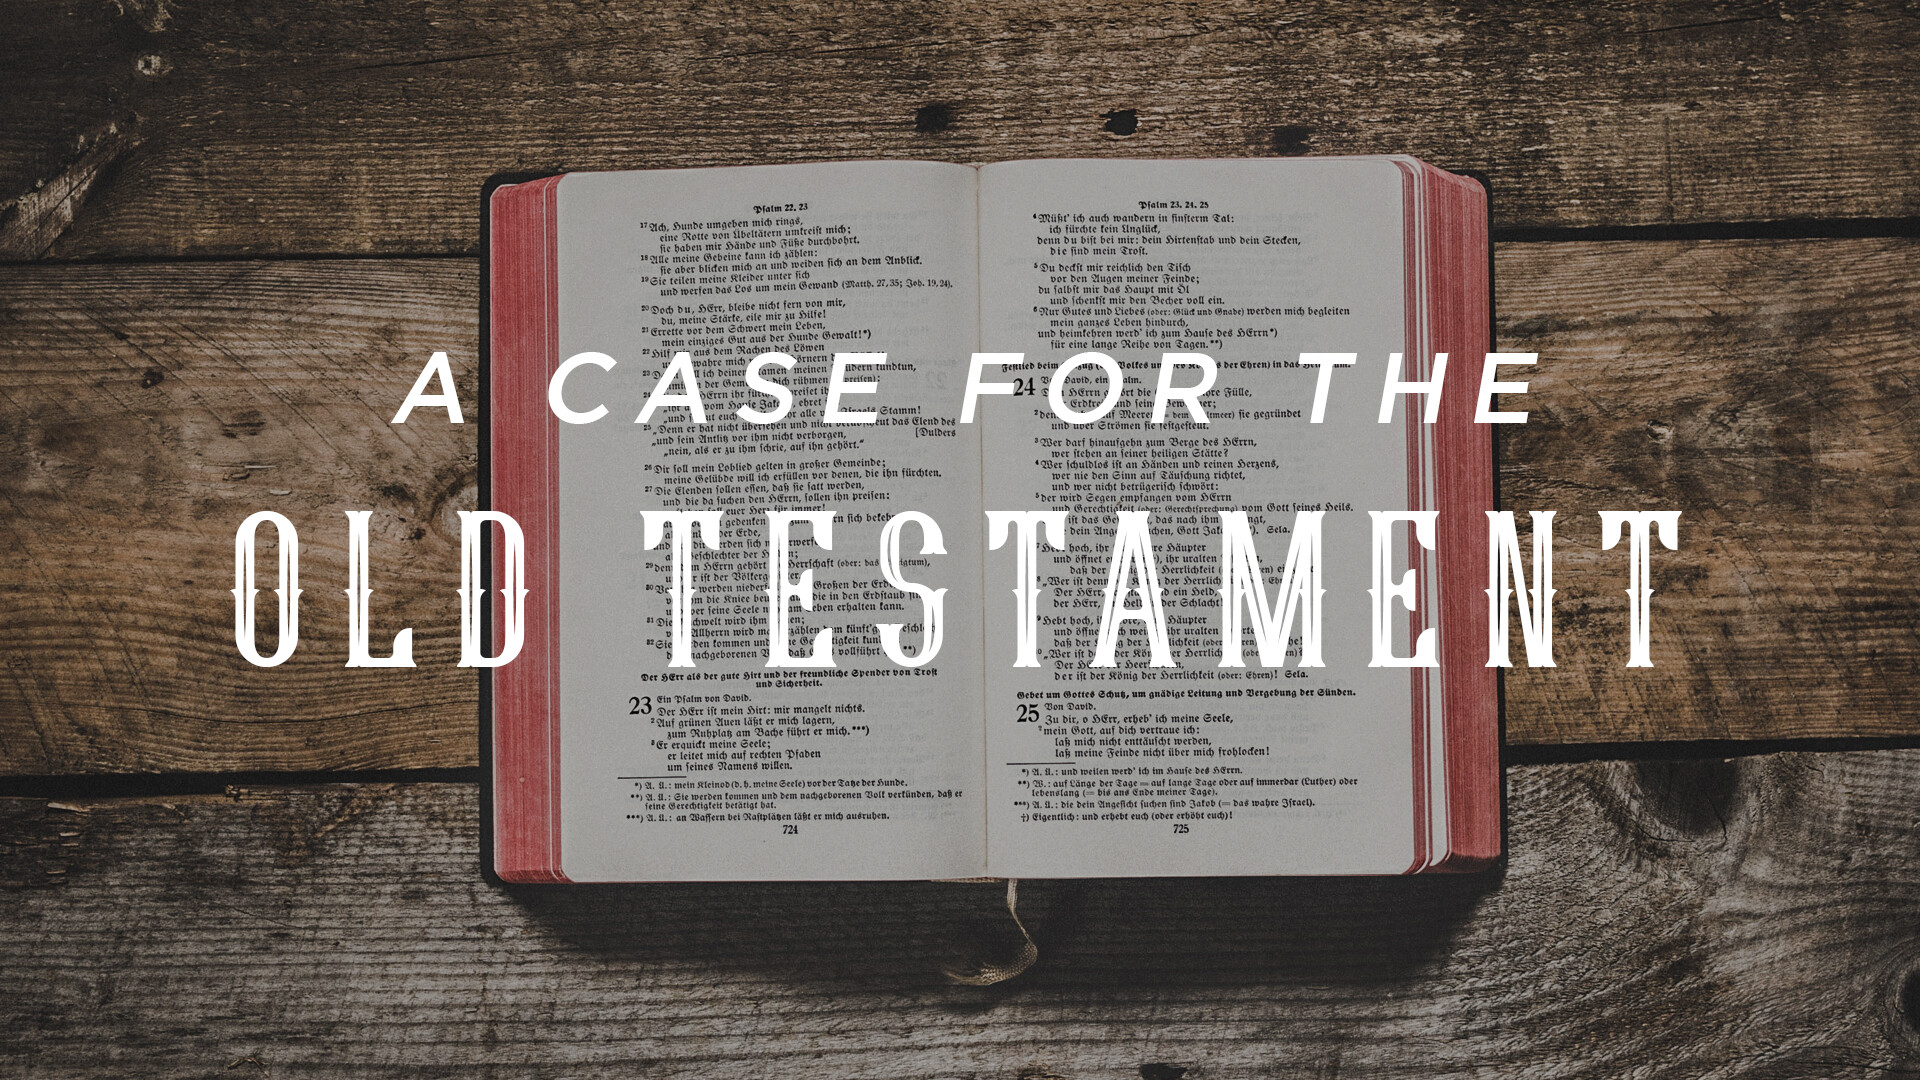 Class: A Case for the Old Testament